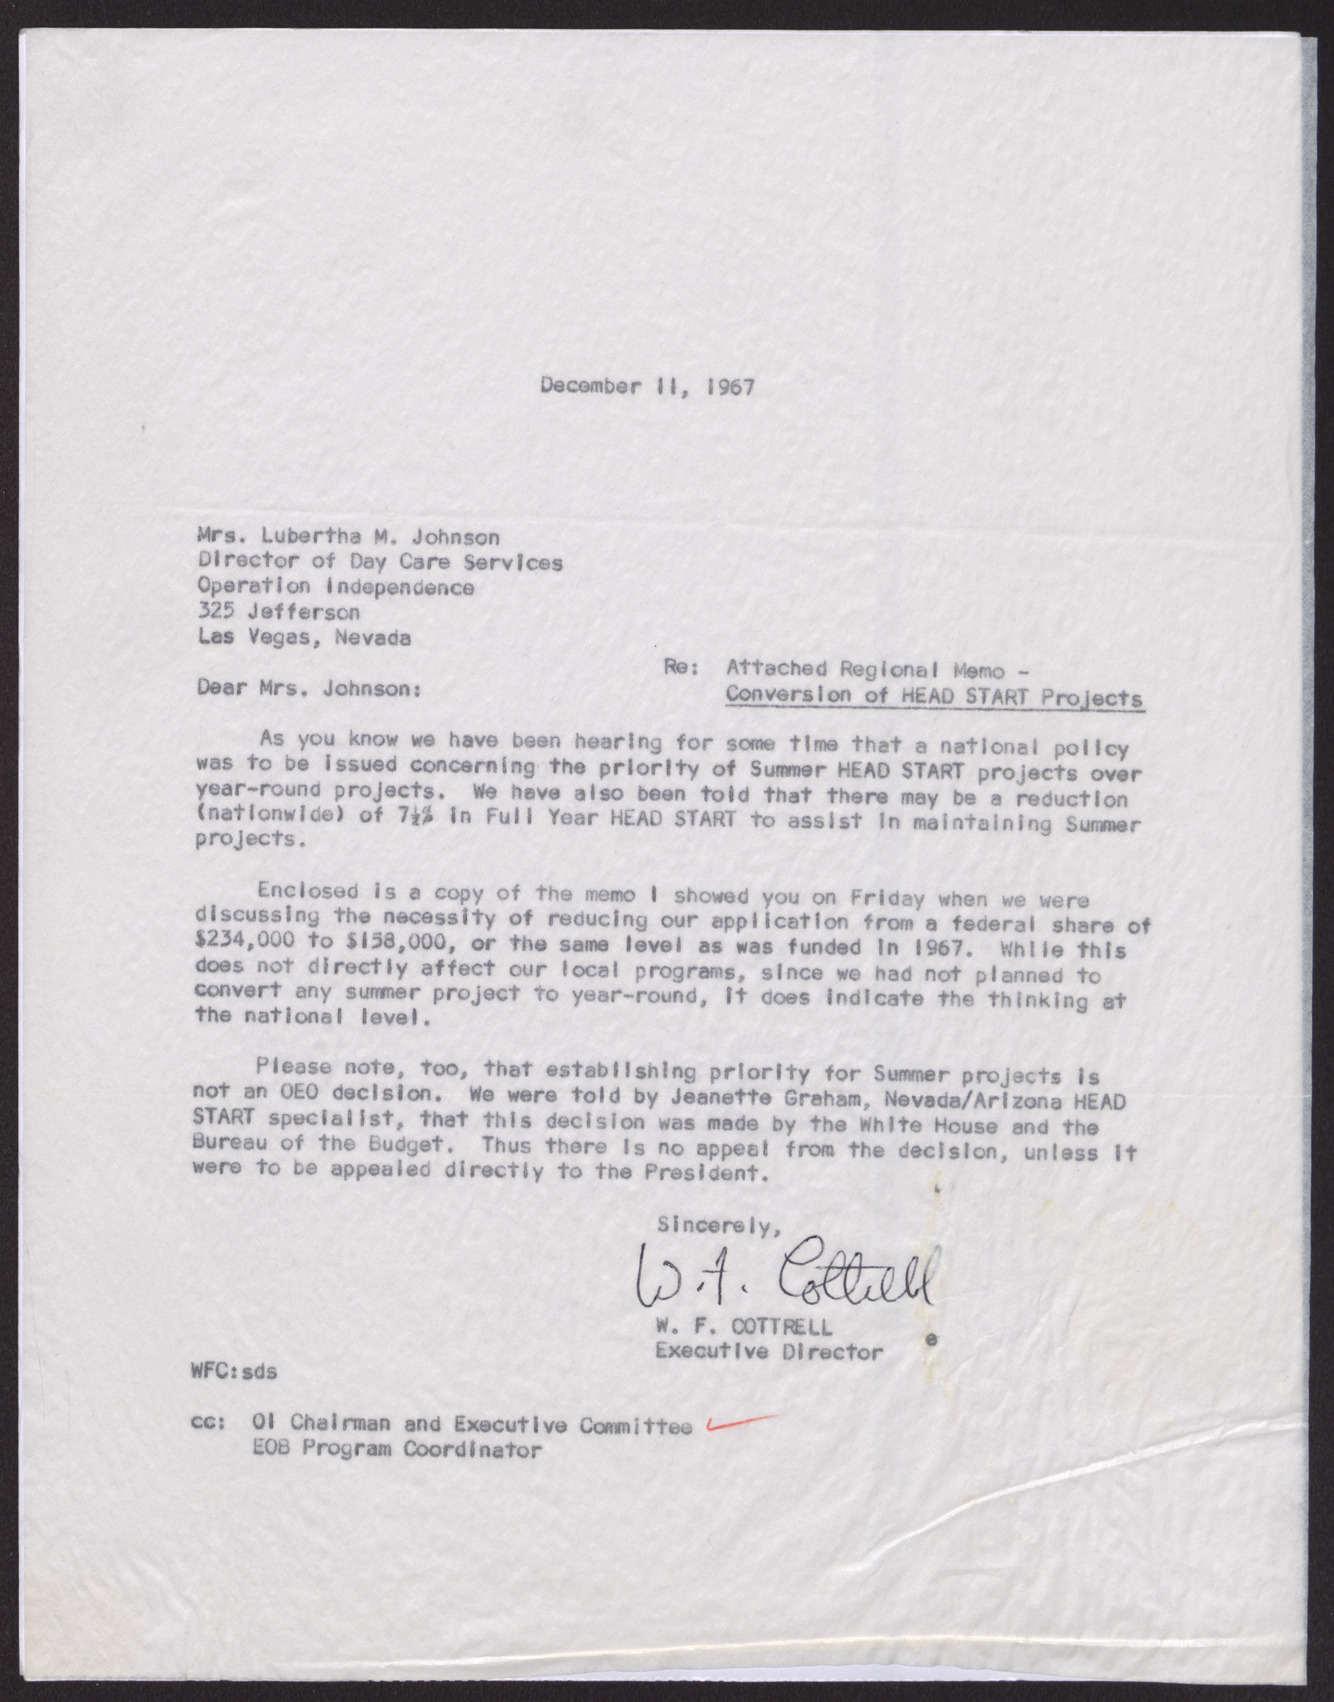 Letter to Mrs. Lubertha M. Johnson from W. F. Cottrell, December 11, 1967